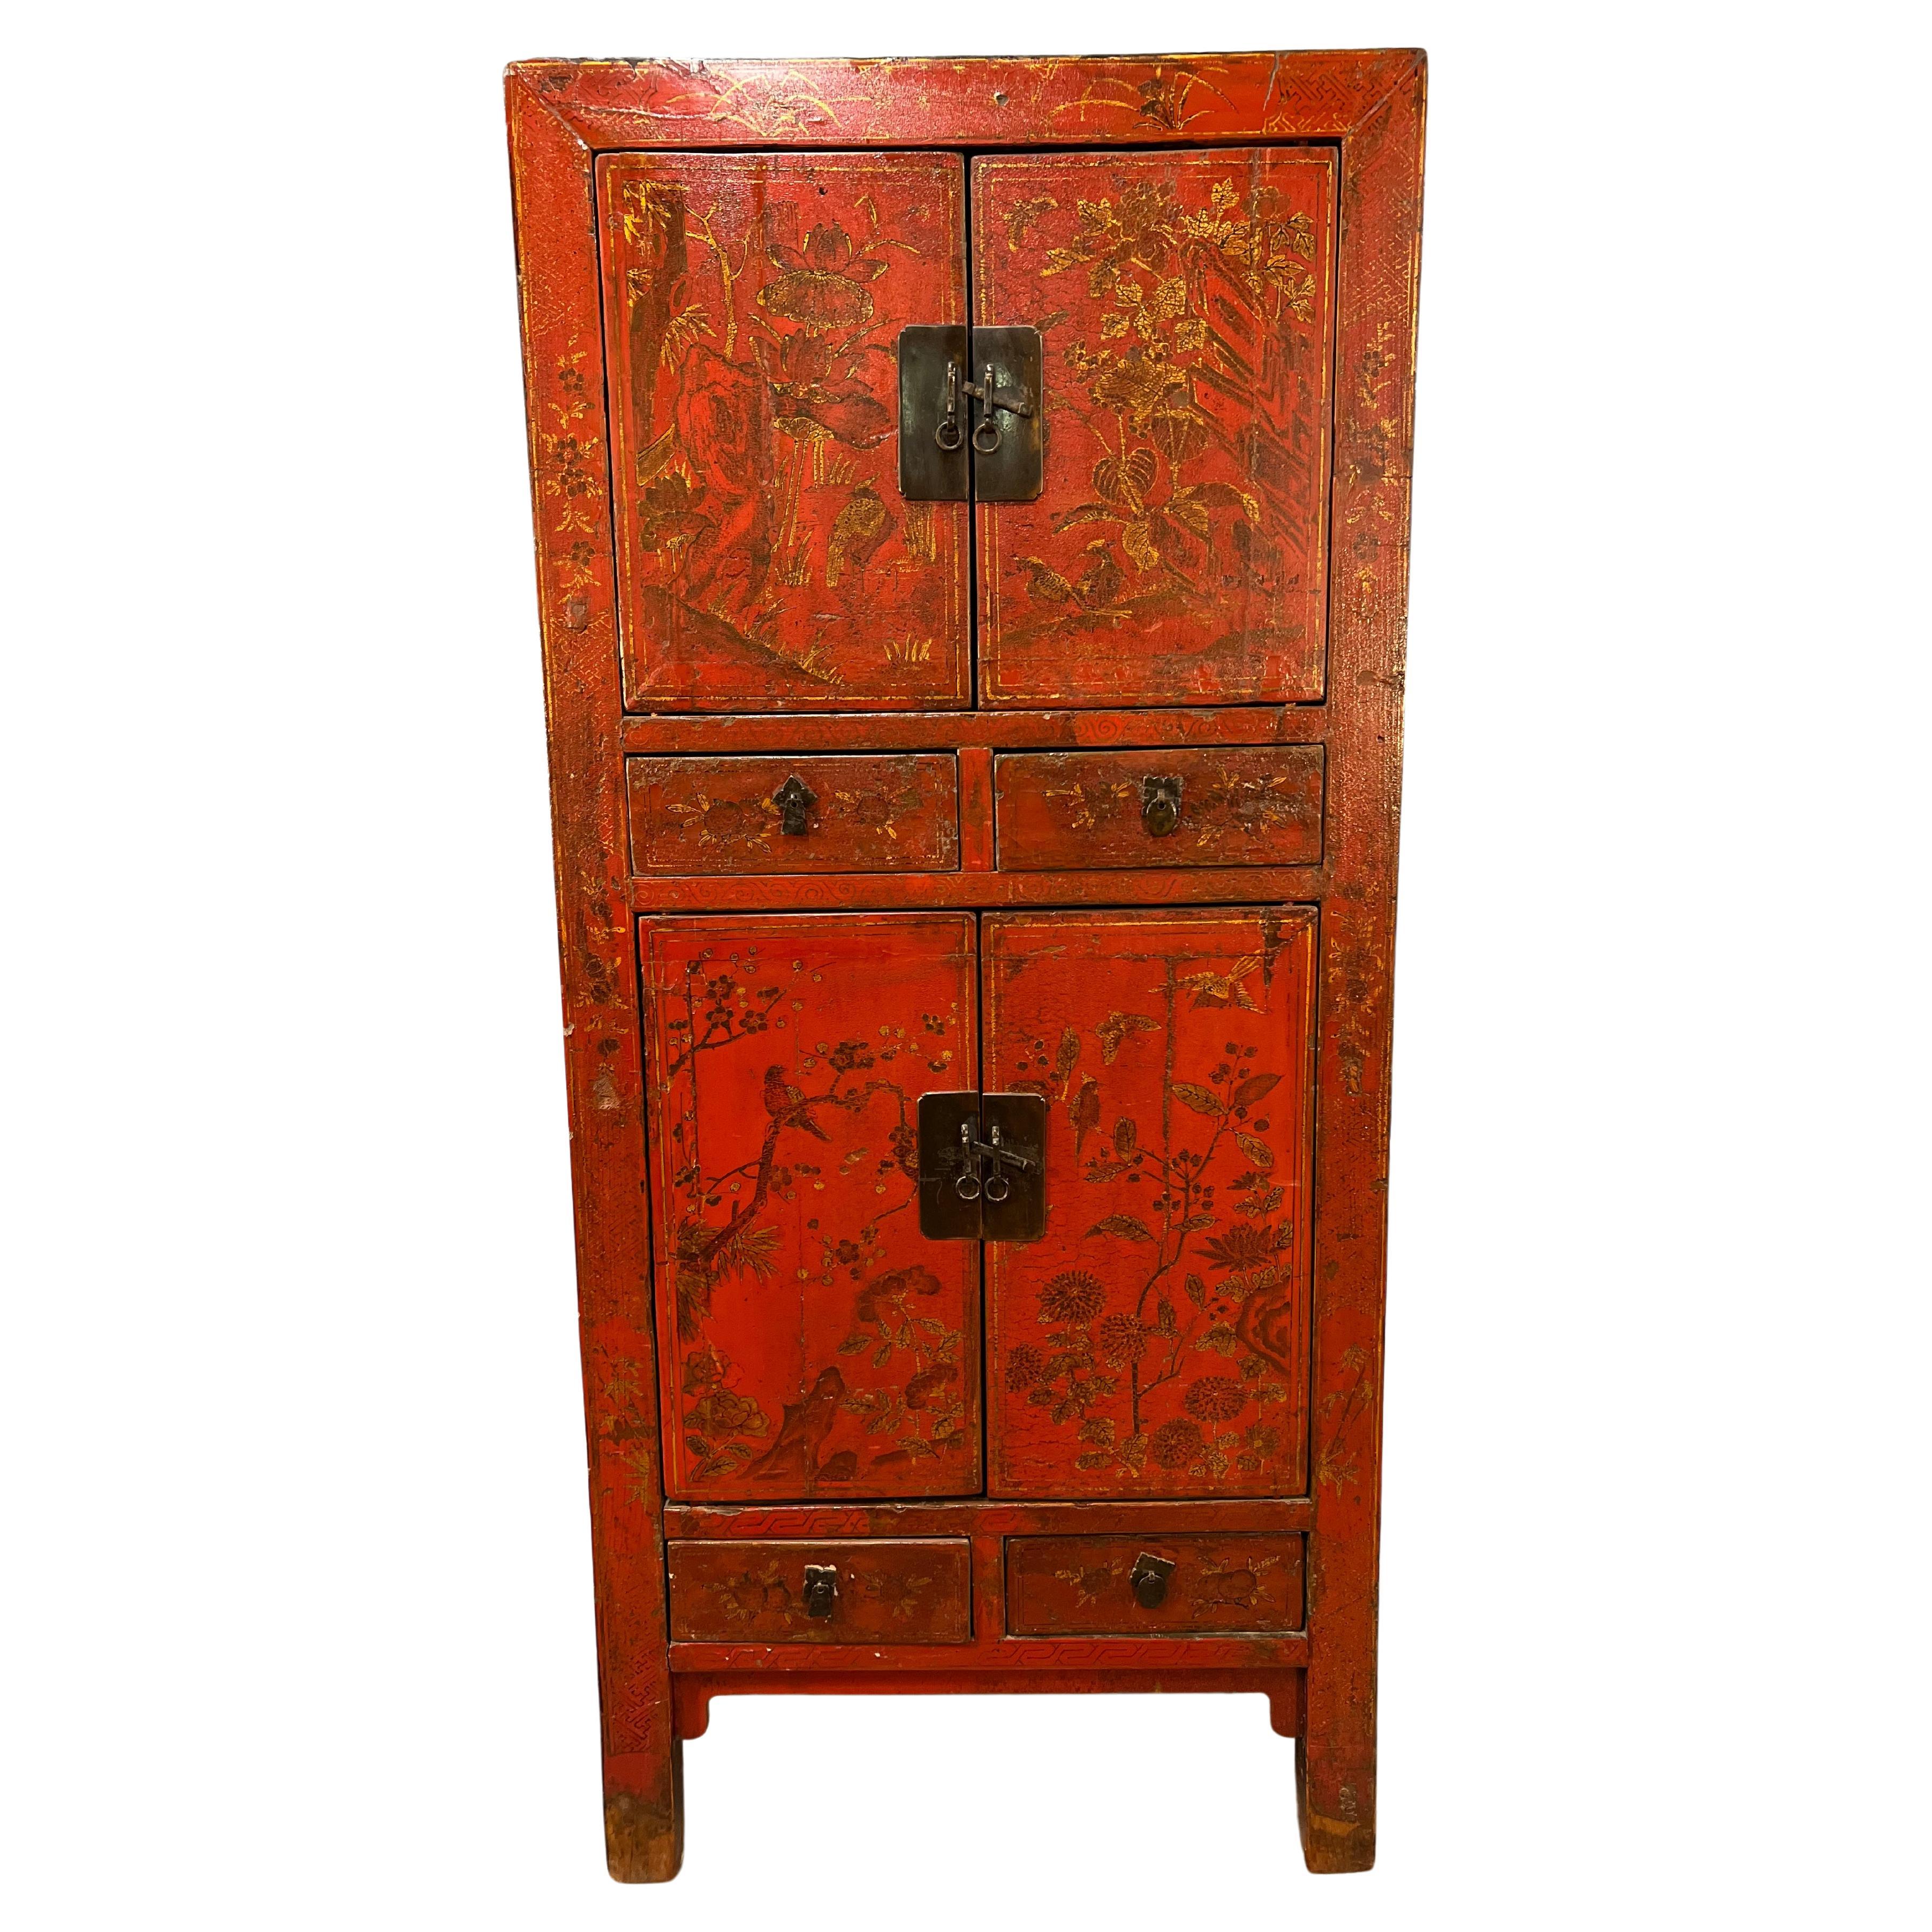 19th Century Chinese Red Lacquer Cabinet with Gilt Decoration